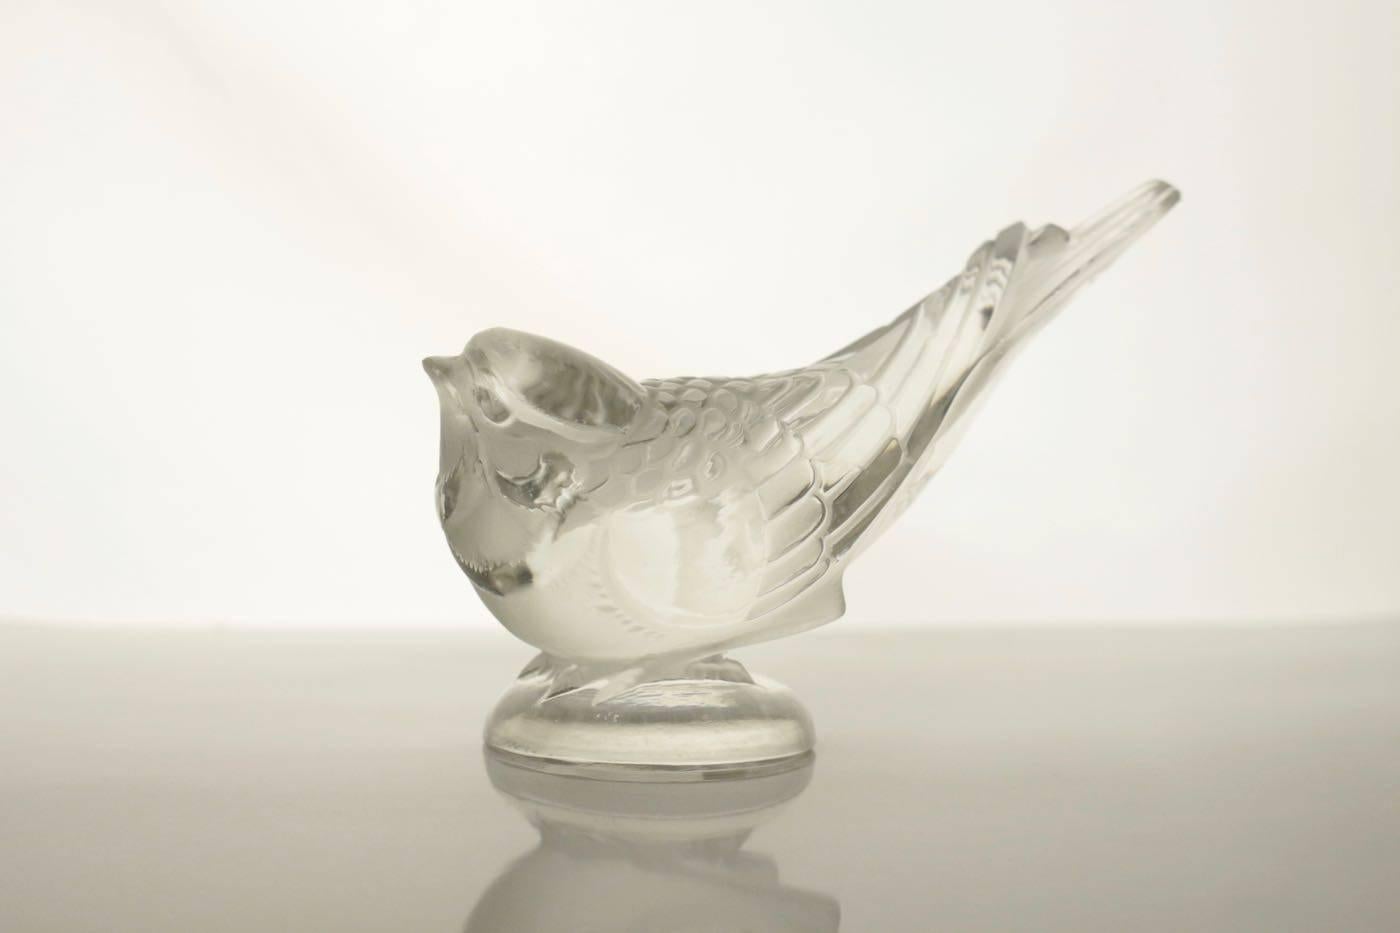 Frosted and clear glass bird figure on incorporated dome shaped round base R. Lalique Paperweight.
Signed R Lalique
model 1209 created in 1931
Marcilhac reference.